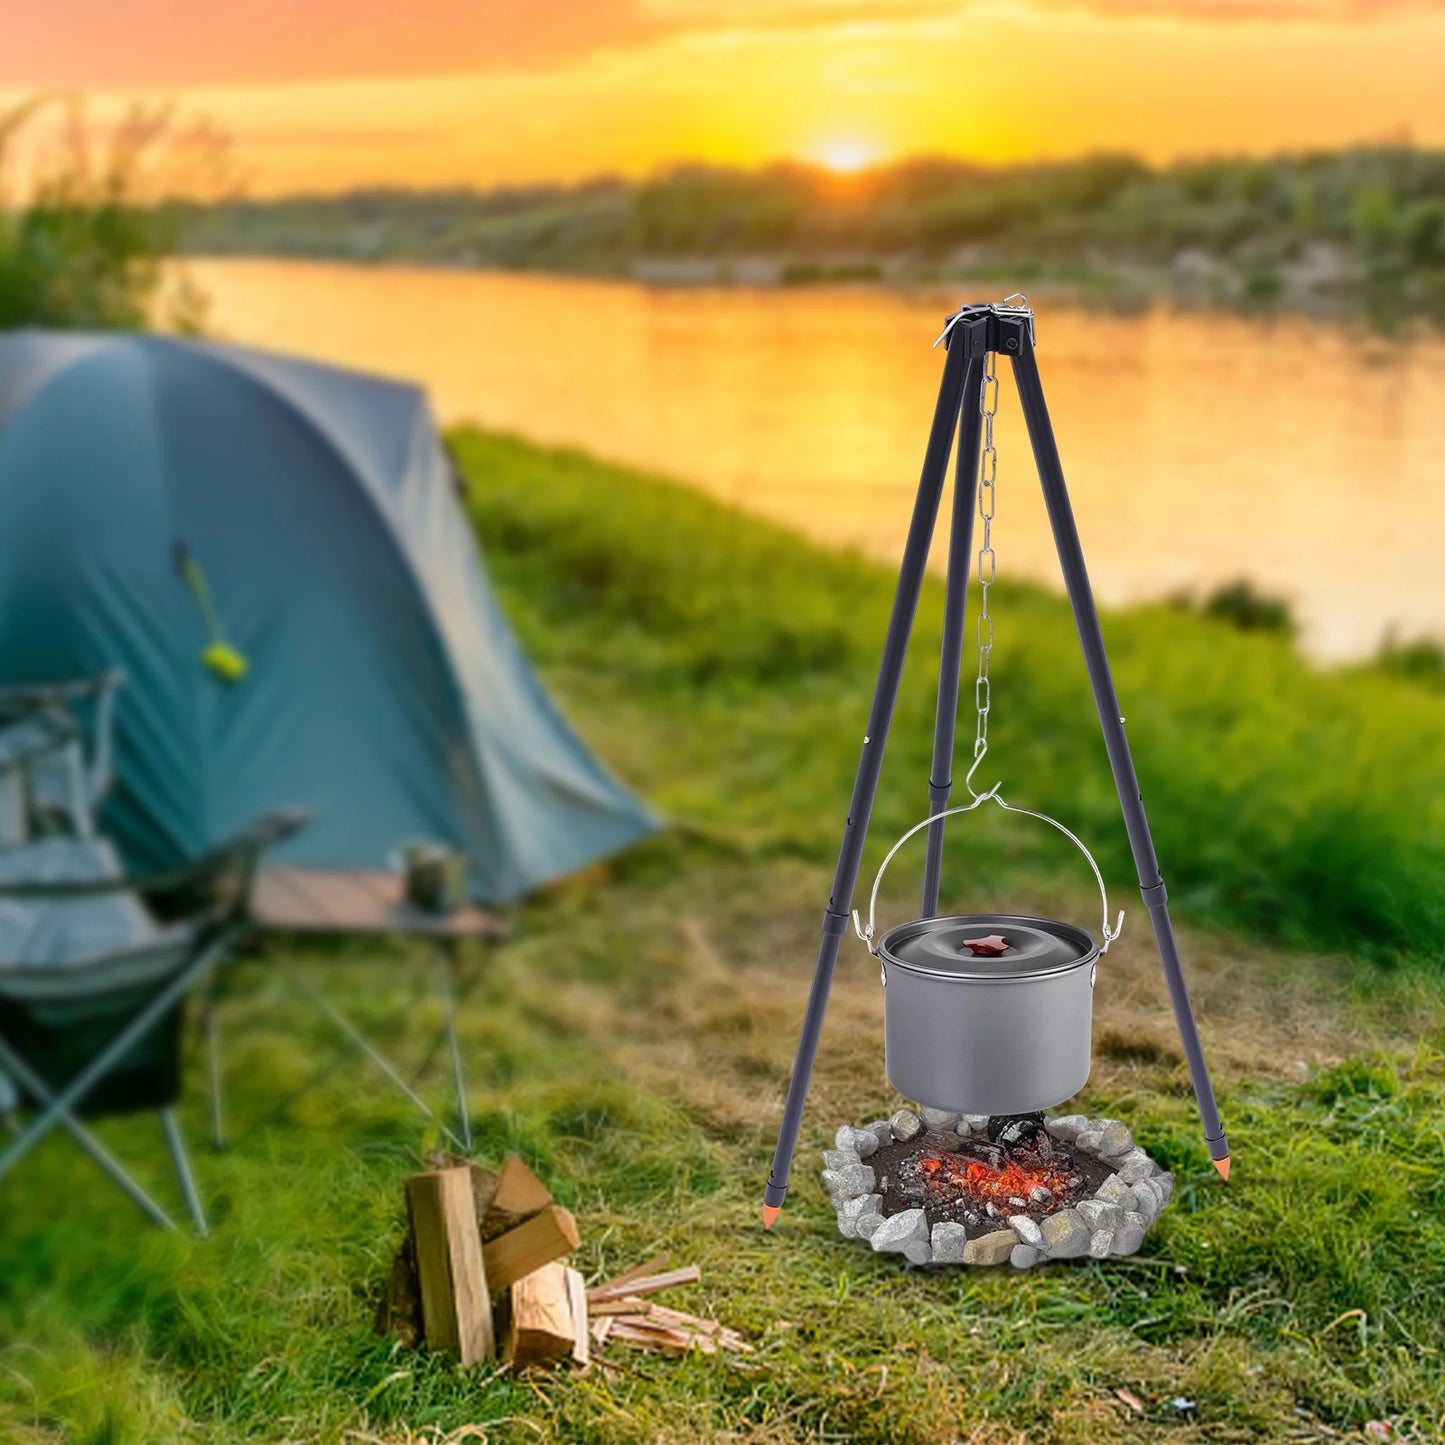 Portable BBQ Tripod Swivel Grill Rack Outdoor Barbecue Gallows Foldable Cooking Pot Holder